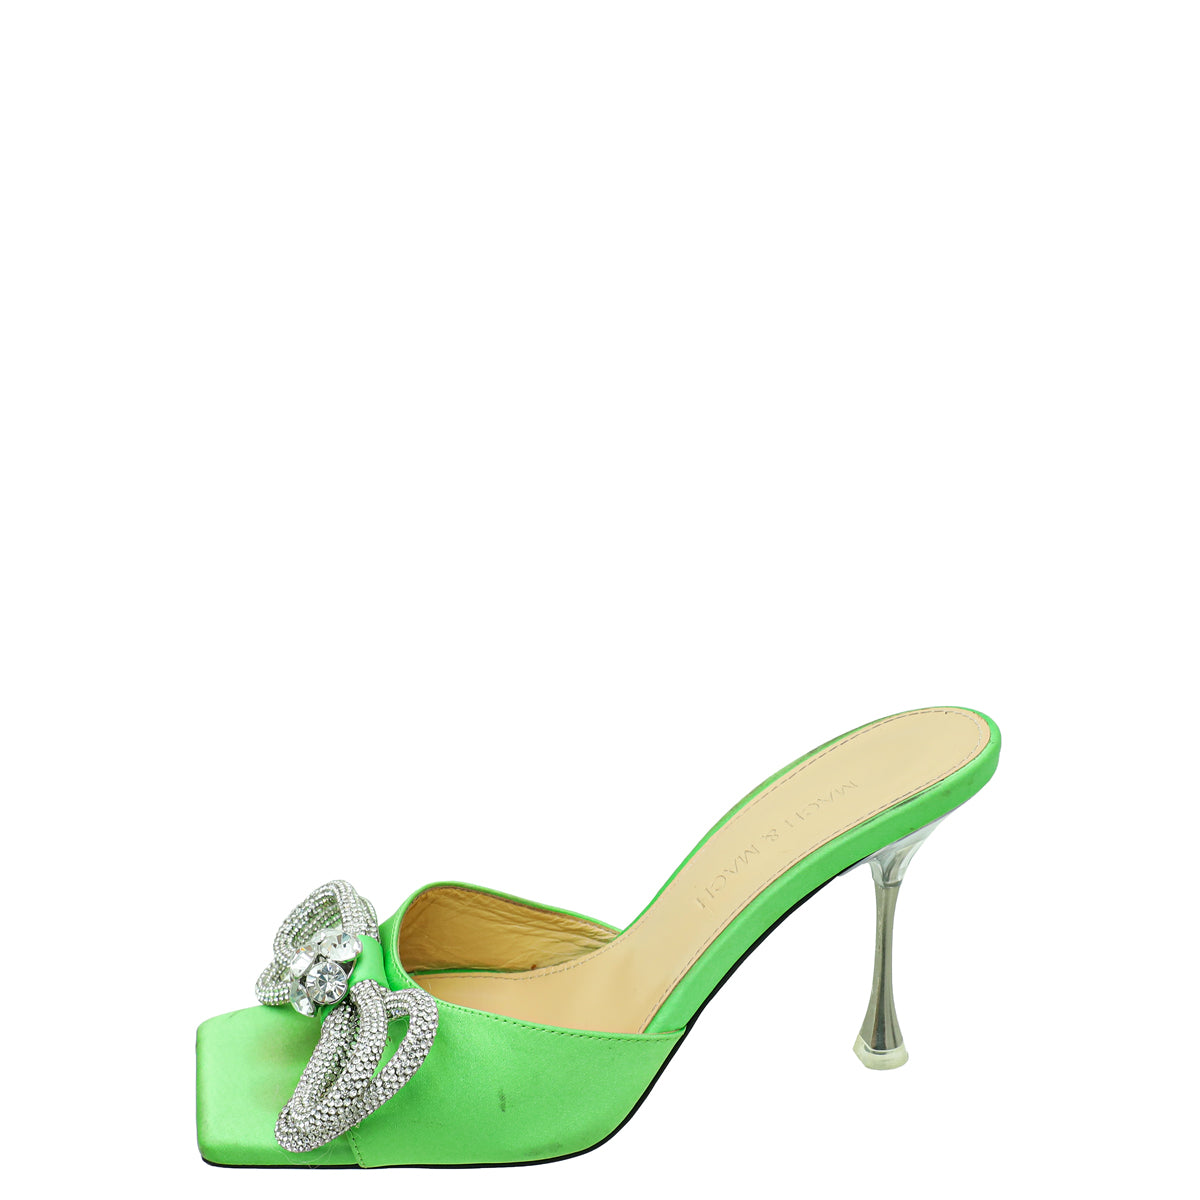 Mach & Mach Green Satin Double Bow Crystal Mules 37